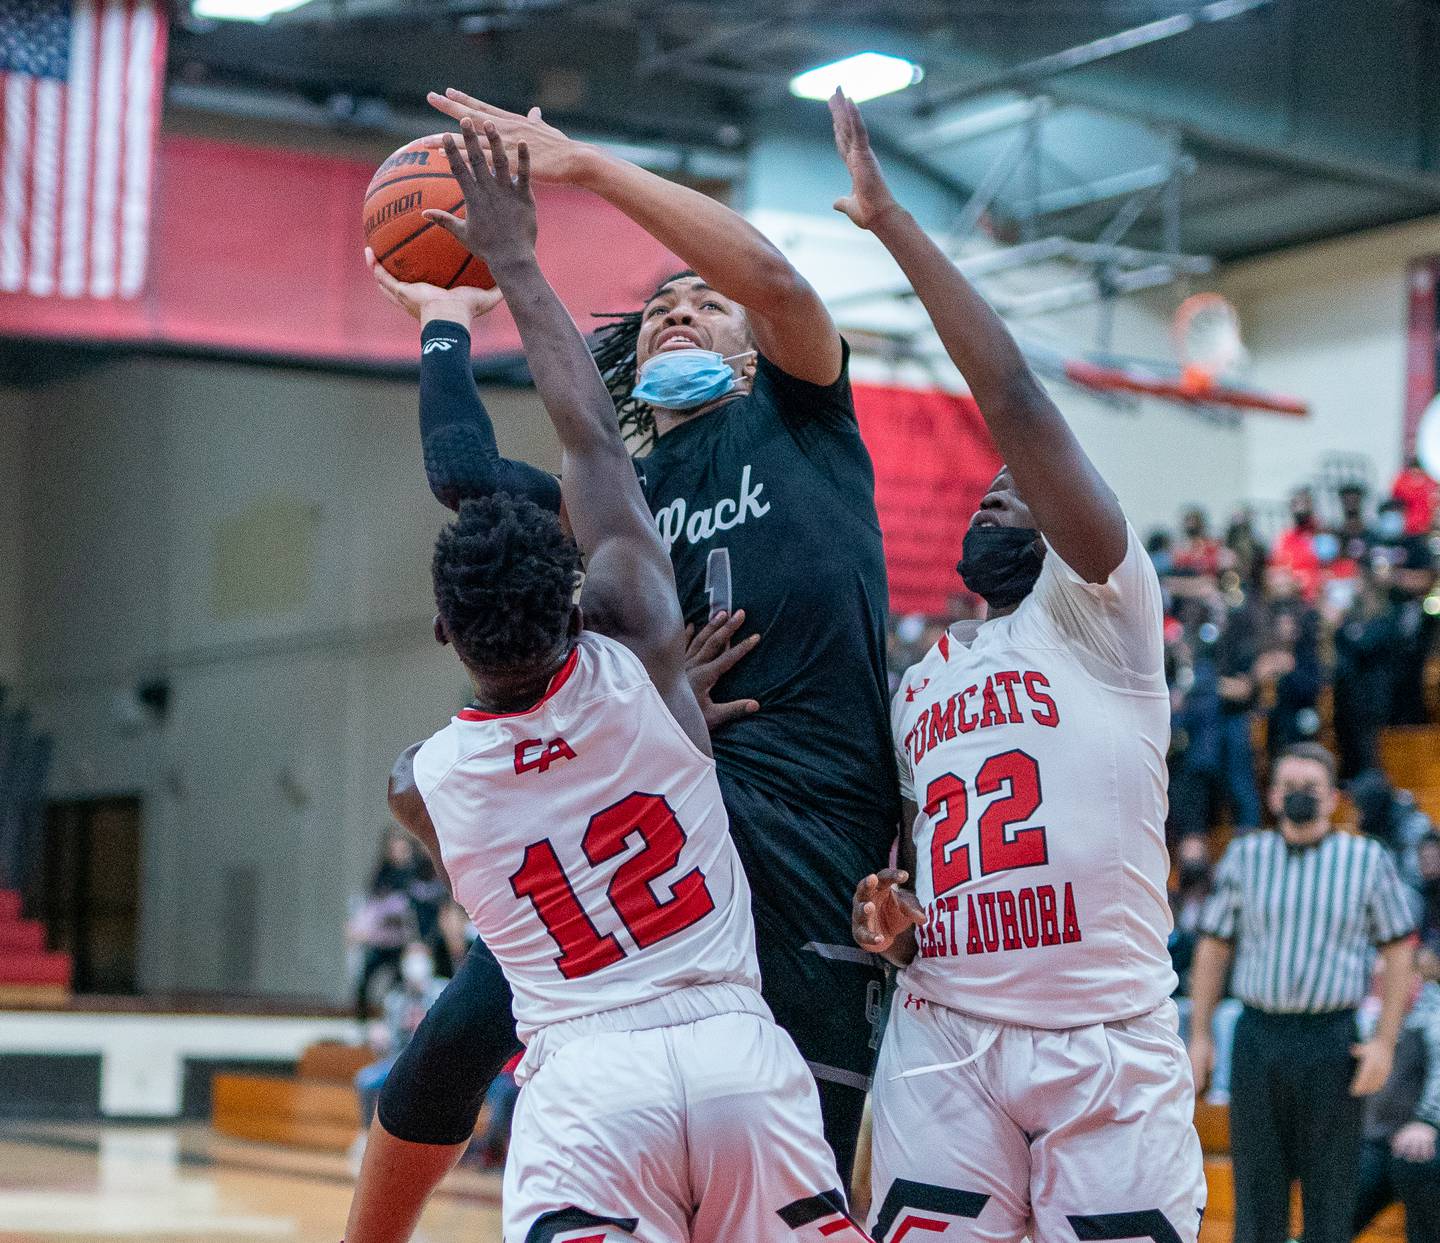 Oswego East's Patrick Robinson (1) shoots the ball in the post against East Aurora's Ralph Clark (12) and Stephen Dorsey (22) during the 11th Annual Kivisto Hoopfest at East Aurora on Saturday, Feb 5, 2022.